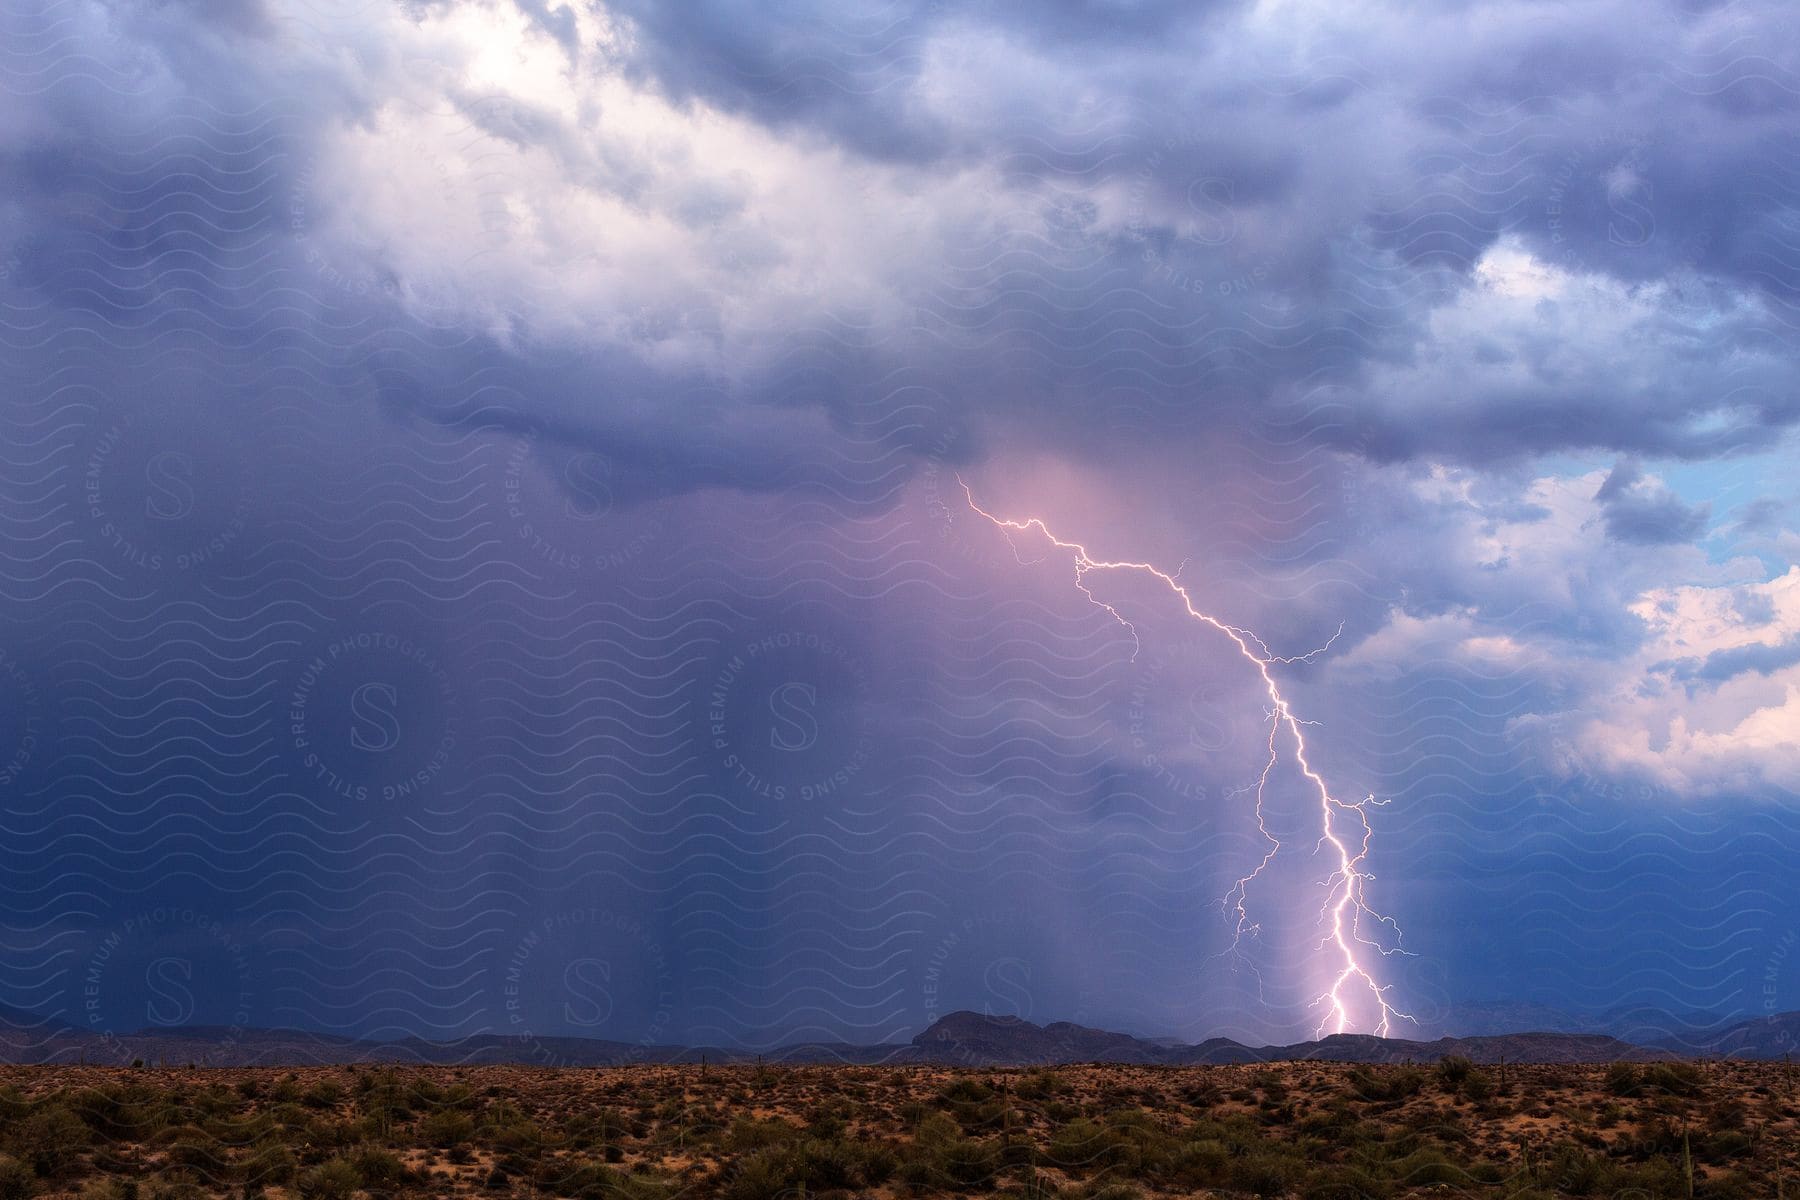 Lightning and rain falling from storm clouds over the mountains in the plains